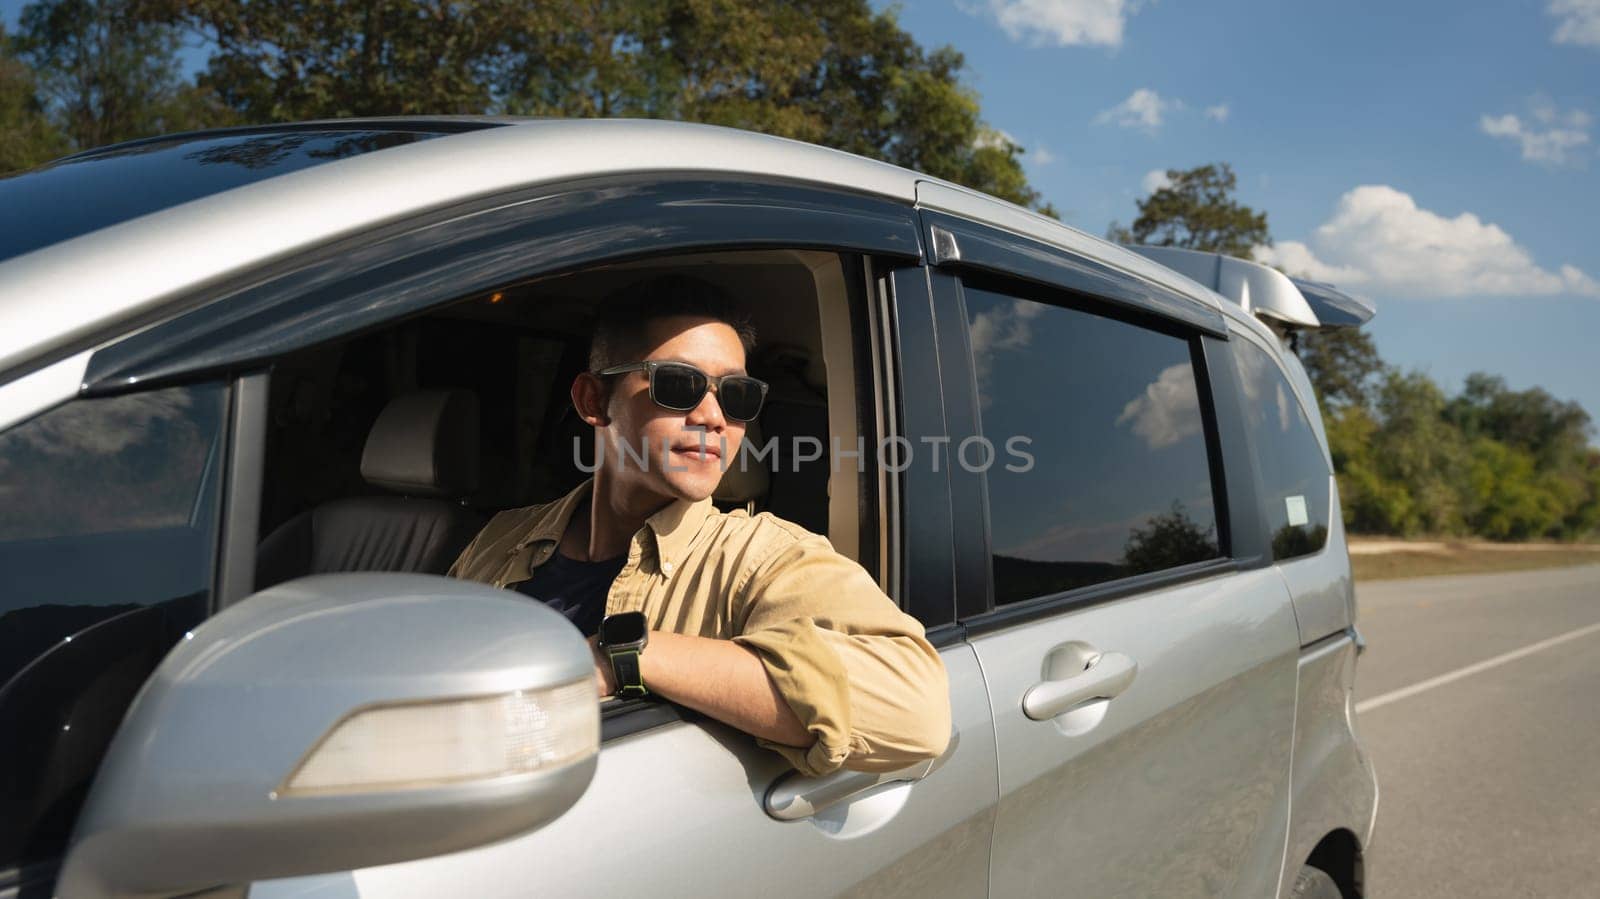 Happy solo traveler leaning out of car window enjoying freedom during road trip. Travel and active lifestyle concept.